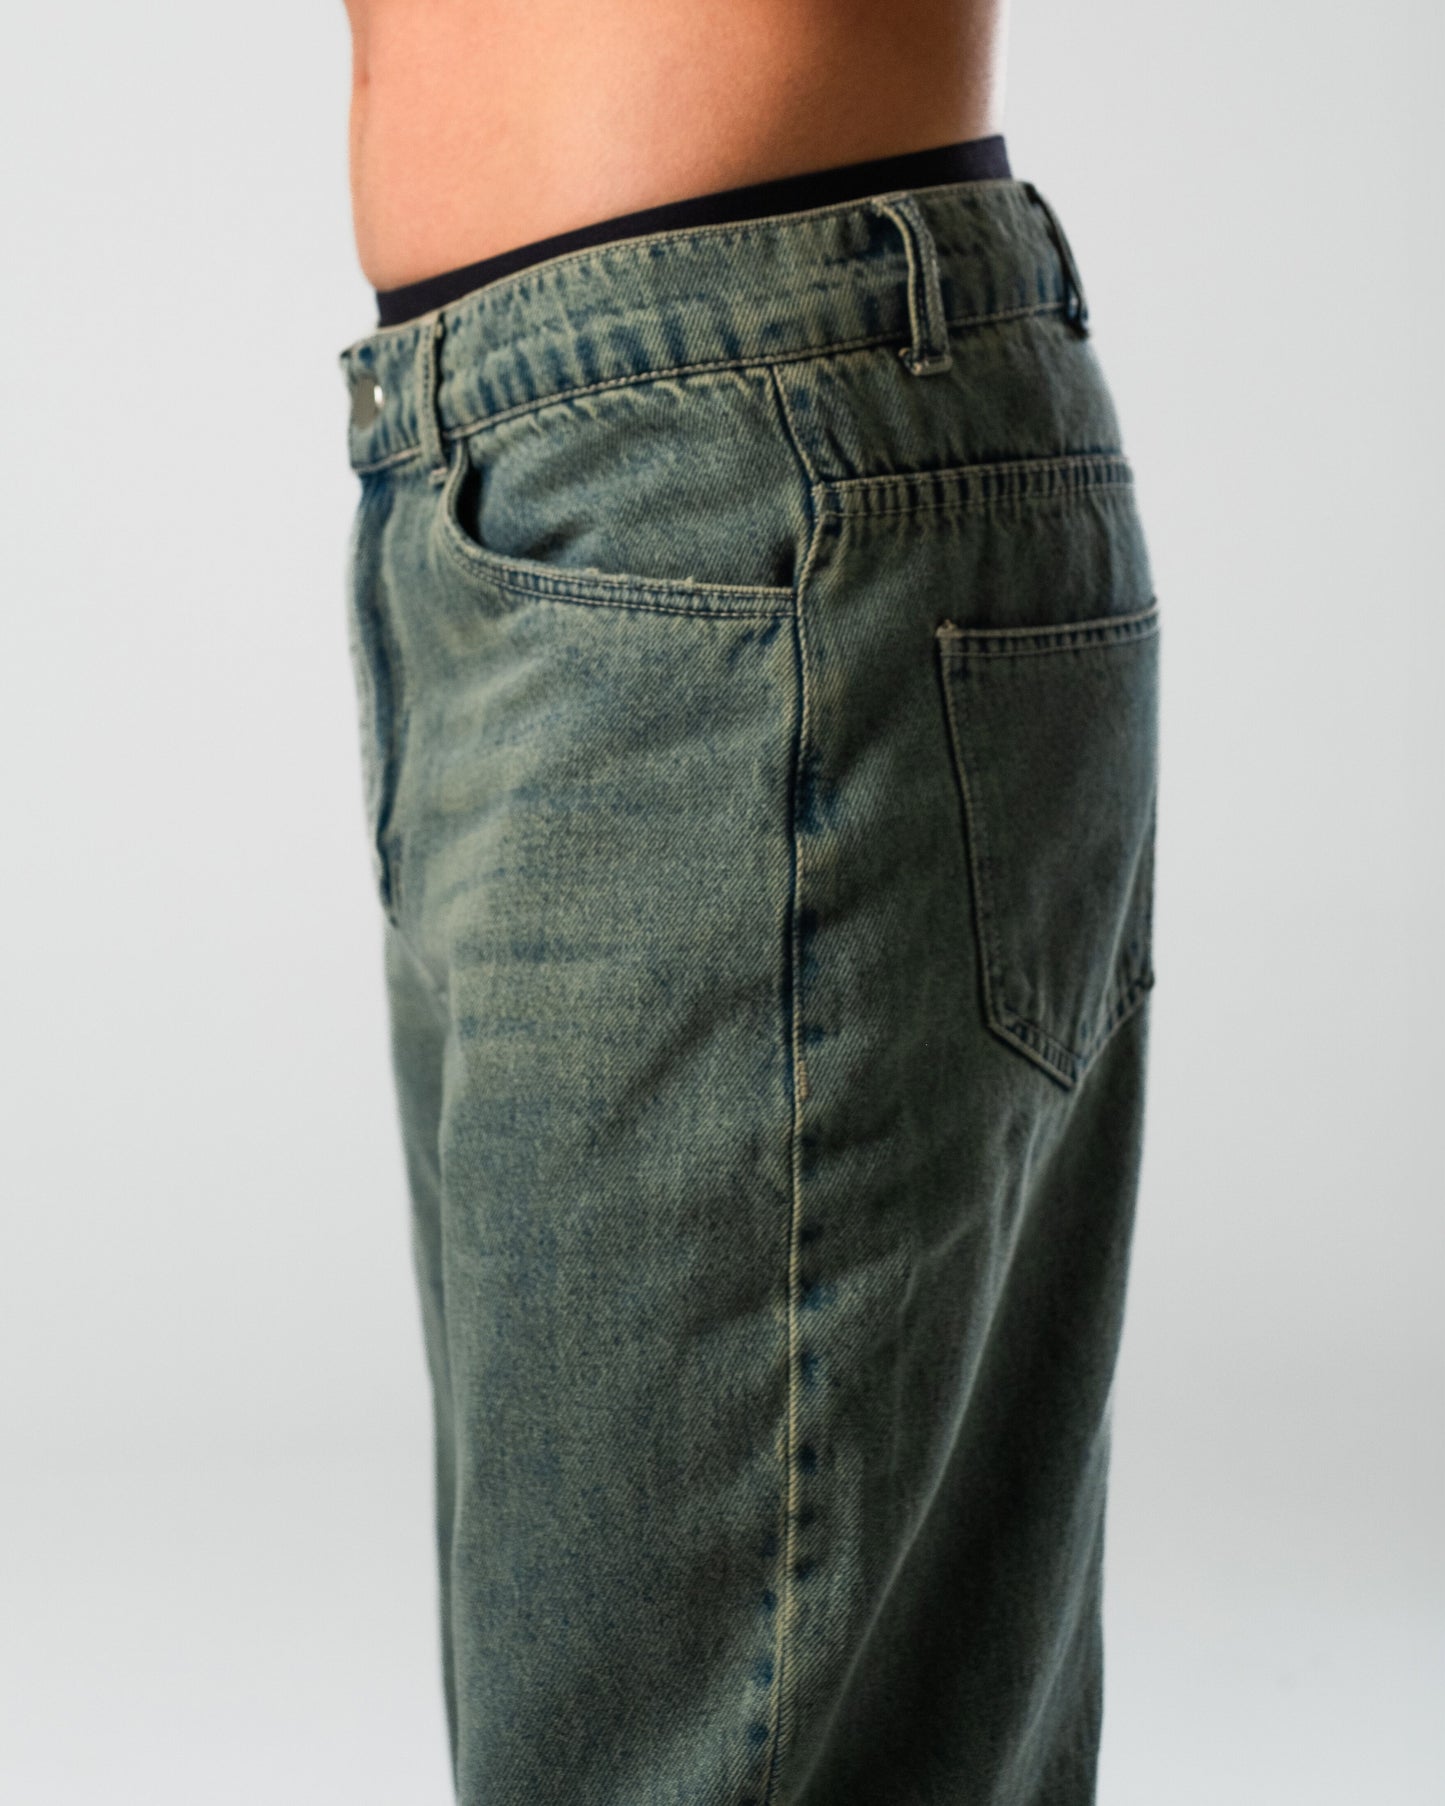 90's Fit Mens Jeans (Green)